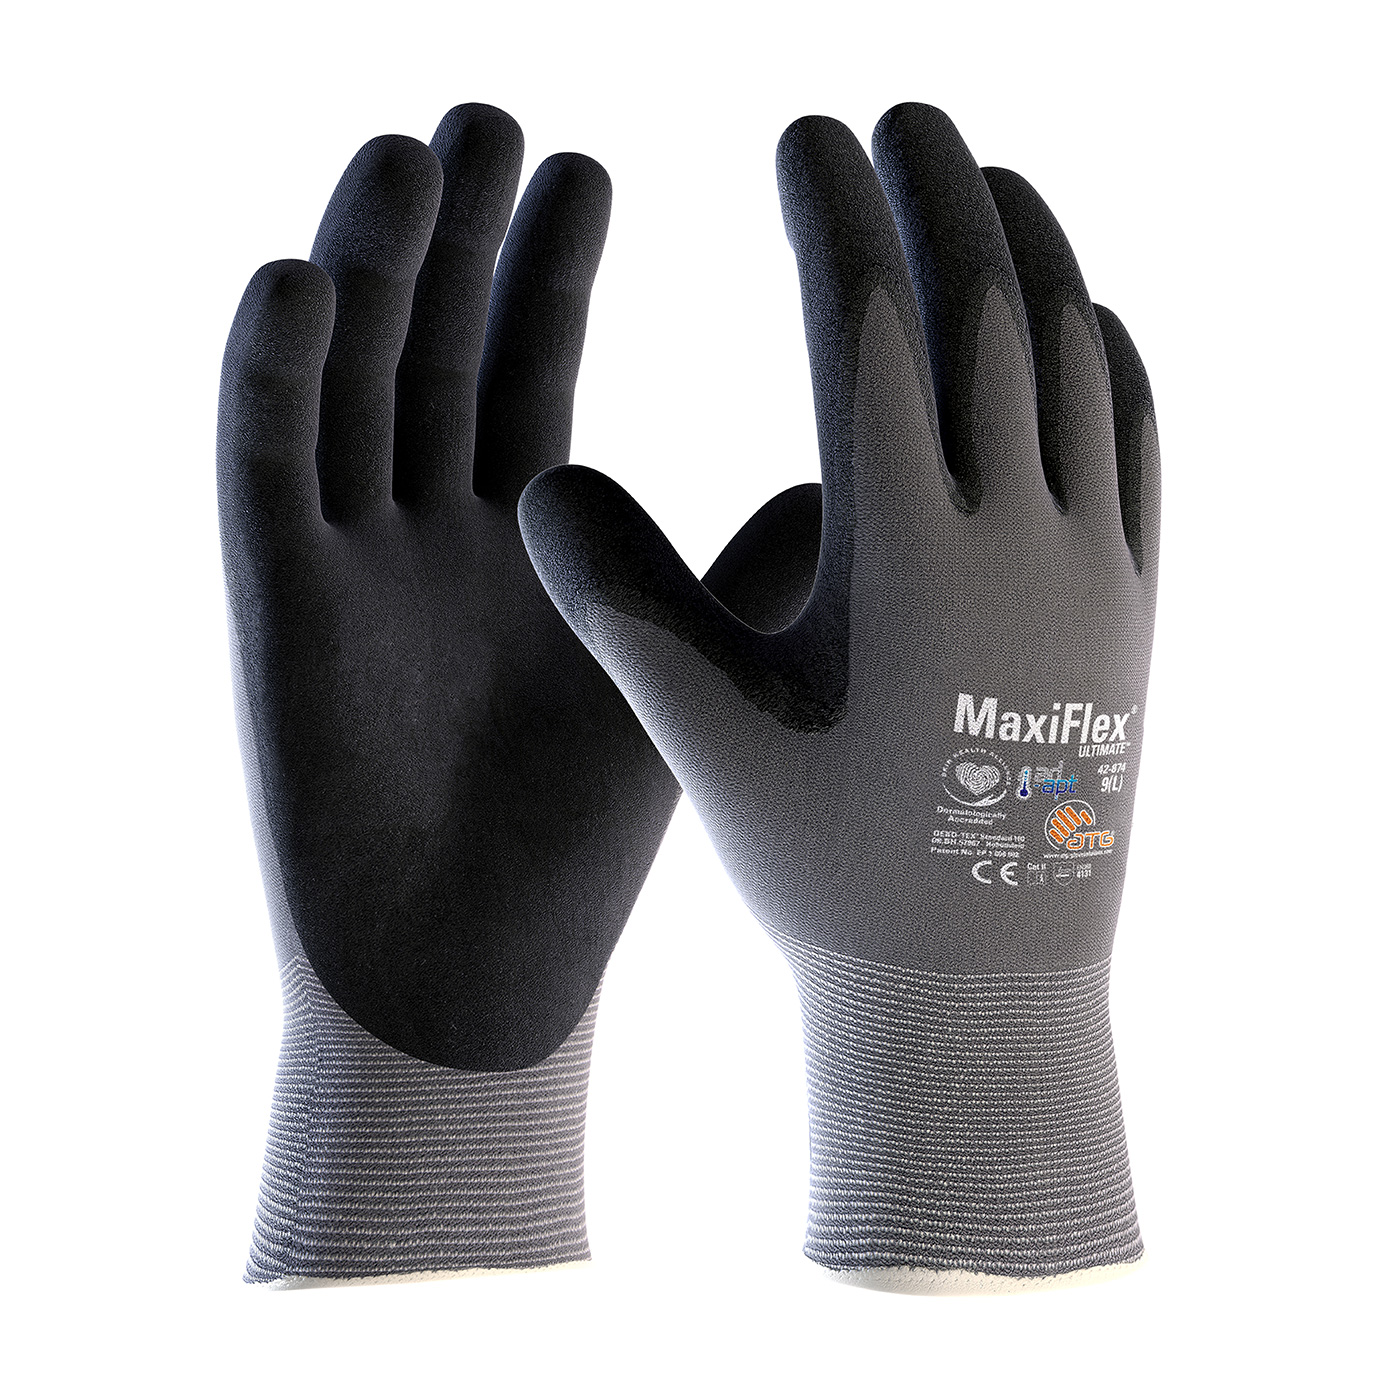 PIP 42-874/M MaxiFlex Ultimate AD-APT Seamless Knit Nylon/Lycra Glove with Nitrile Coated MicroFoam Grip on Palm & Fingers and AD-APT Technology - Medium PID-42874M